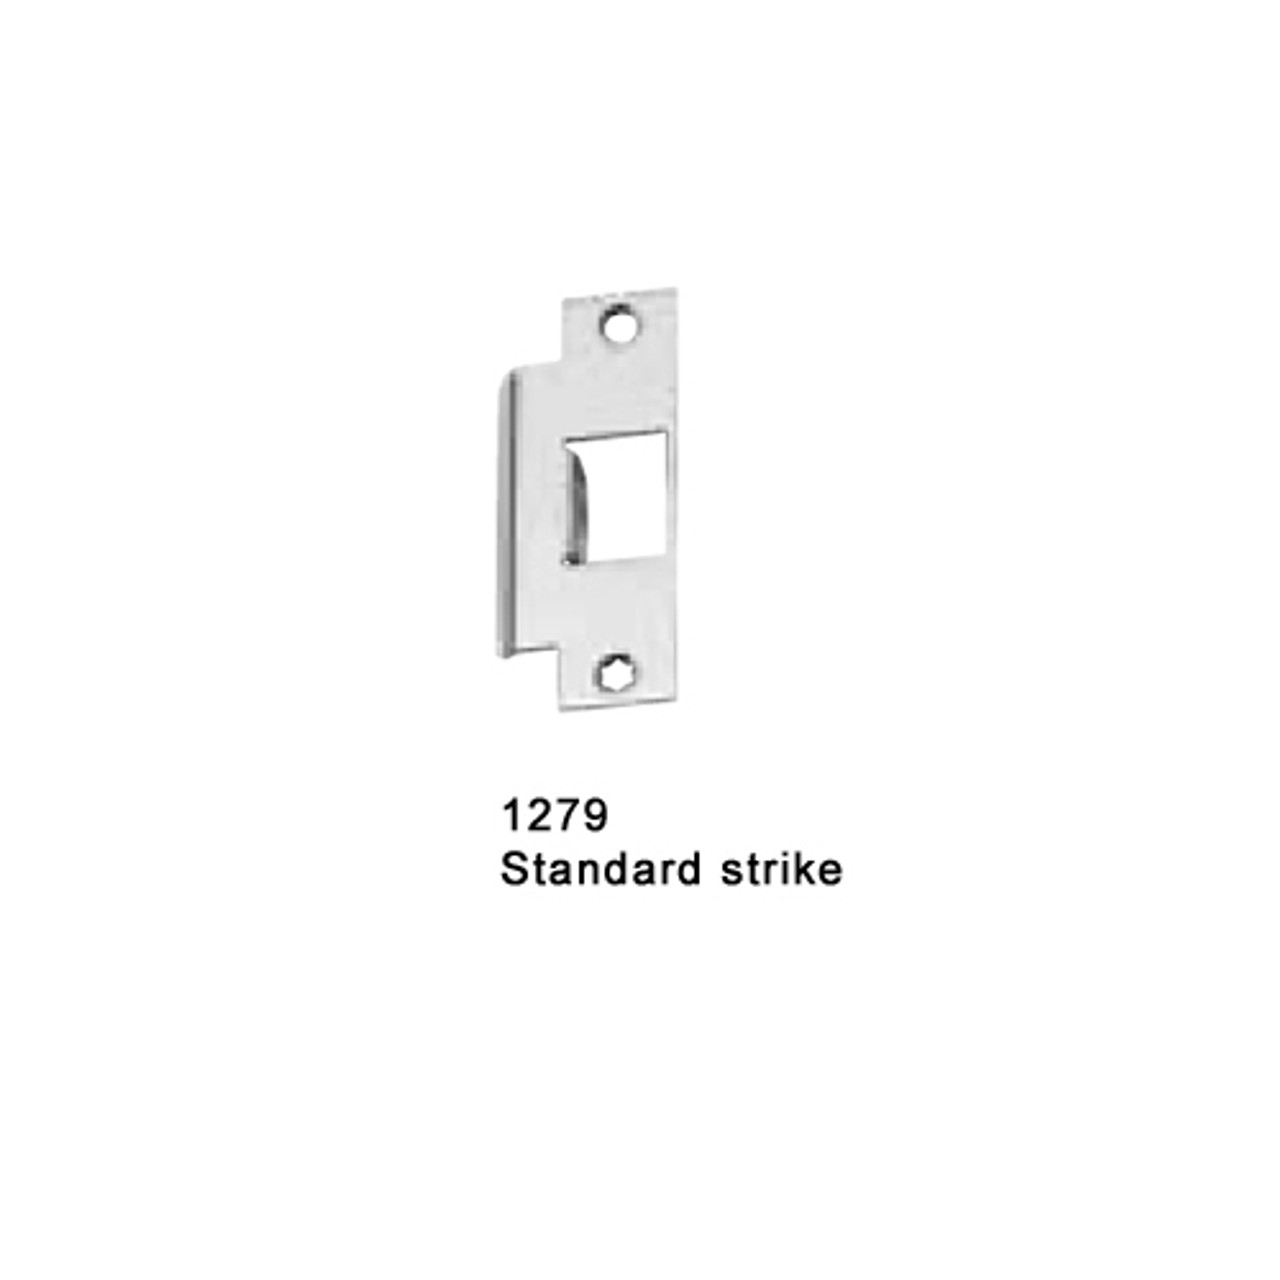 F-25-M-EO-US32-3-LHR Falcon 25 Series Fire Rated Exit Only Mortise Lock Devices in Polished Stainless Steel